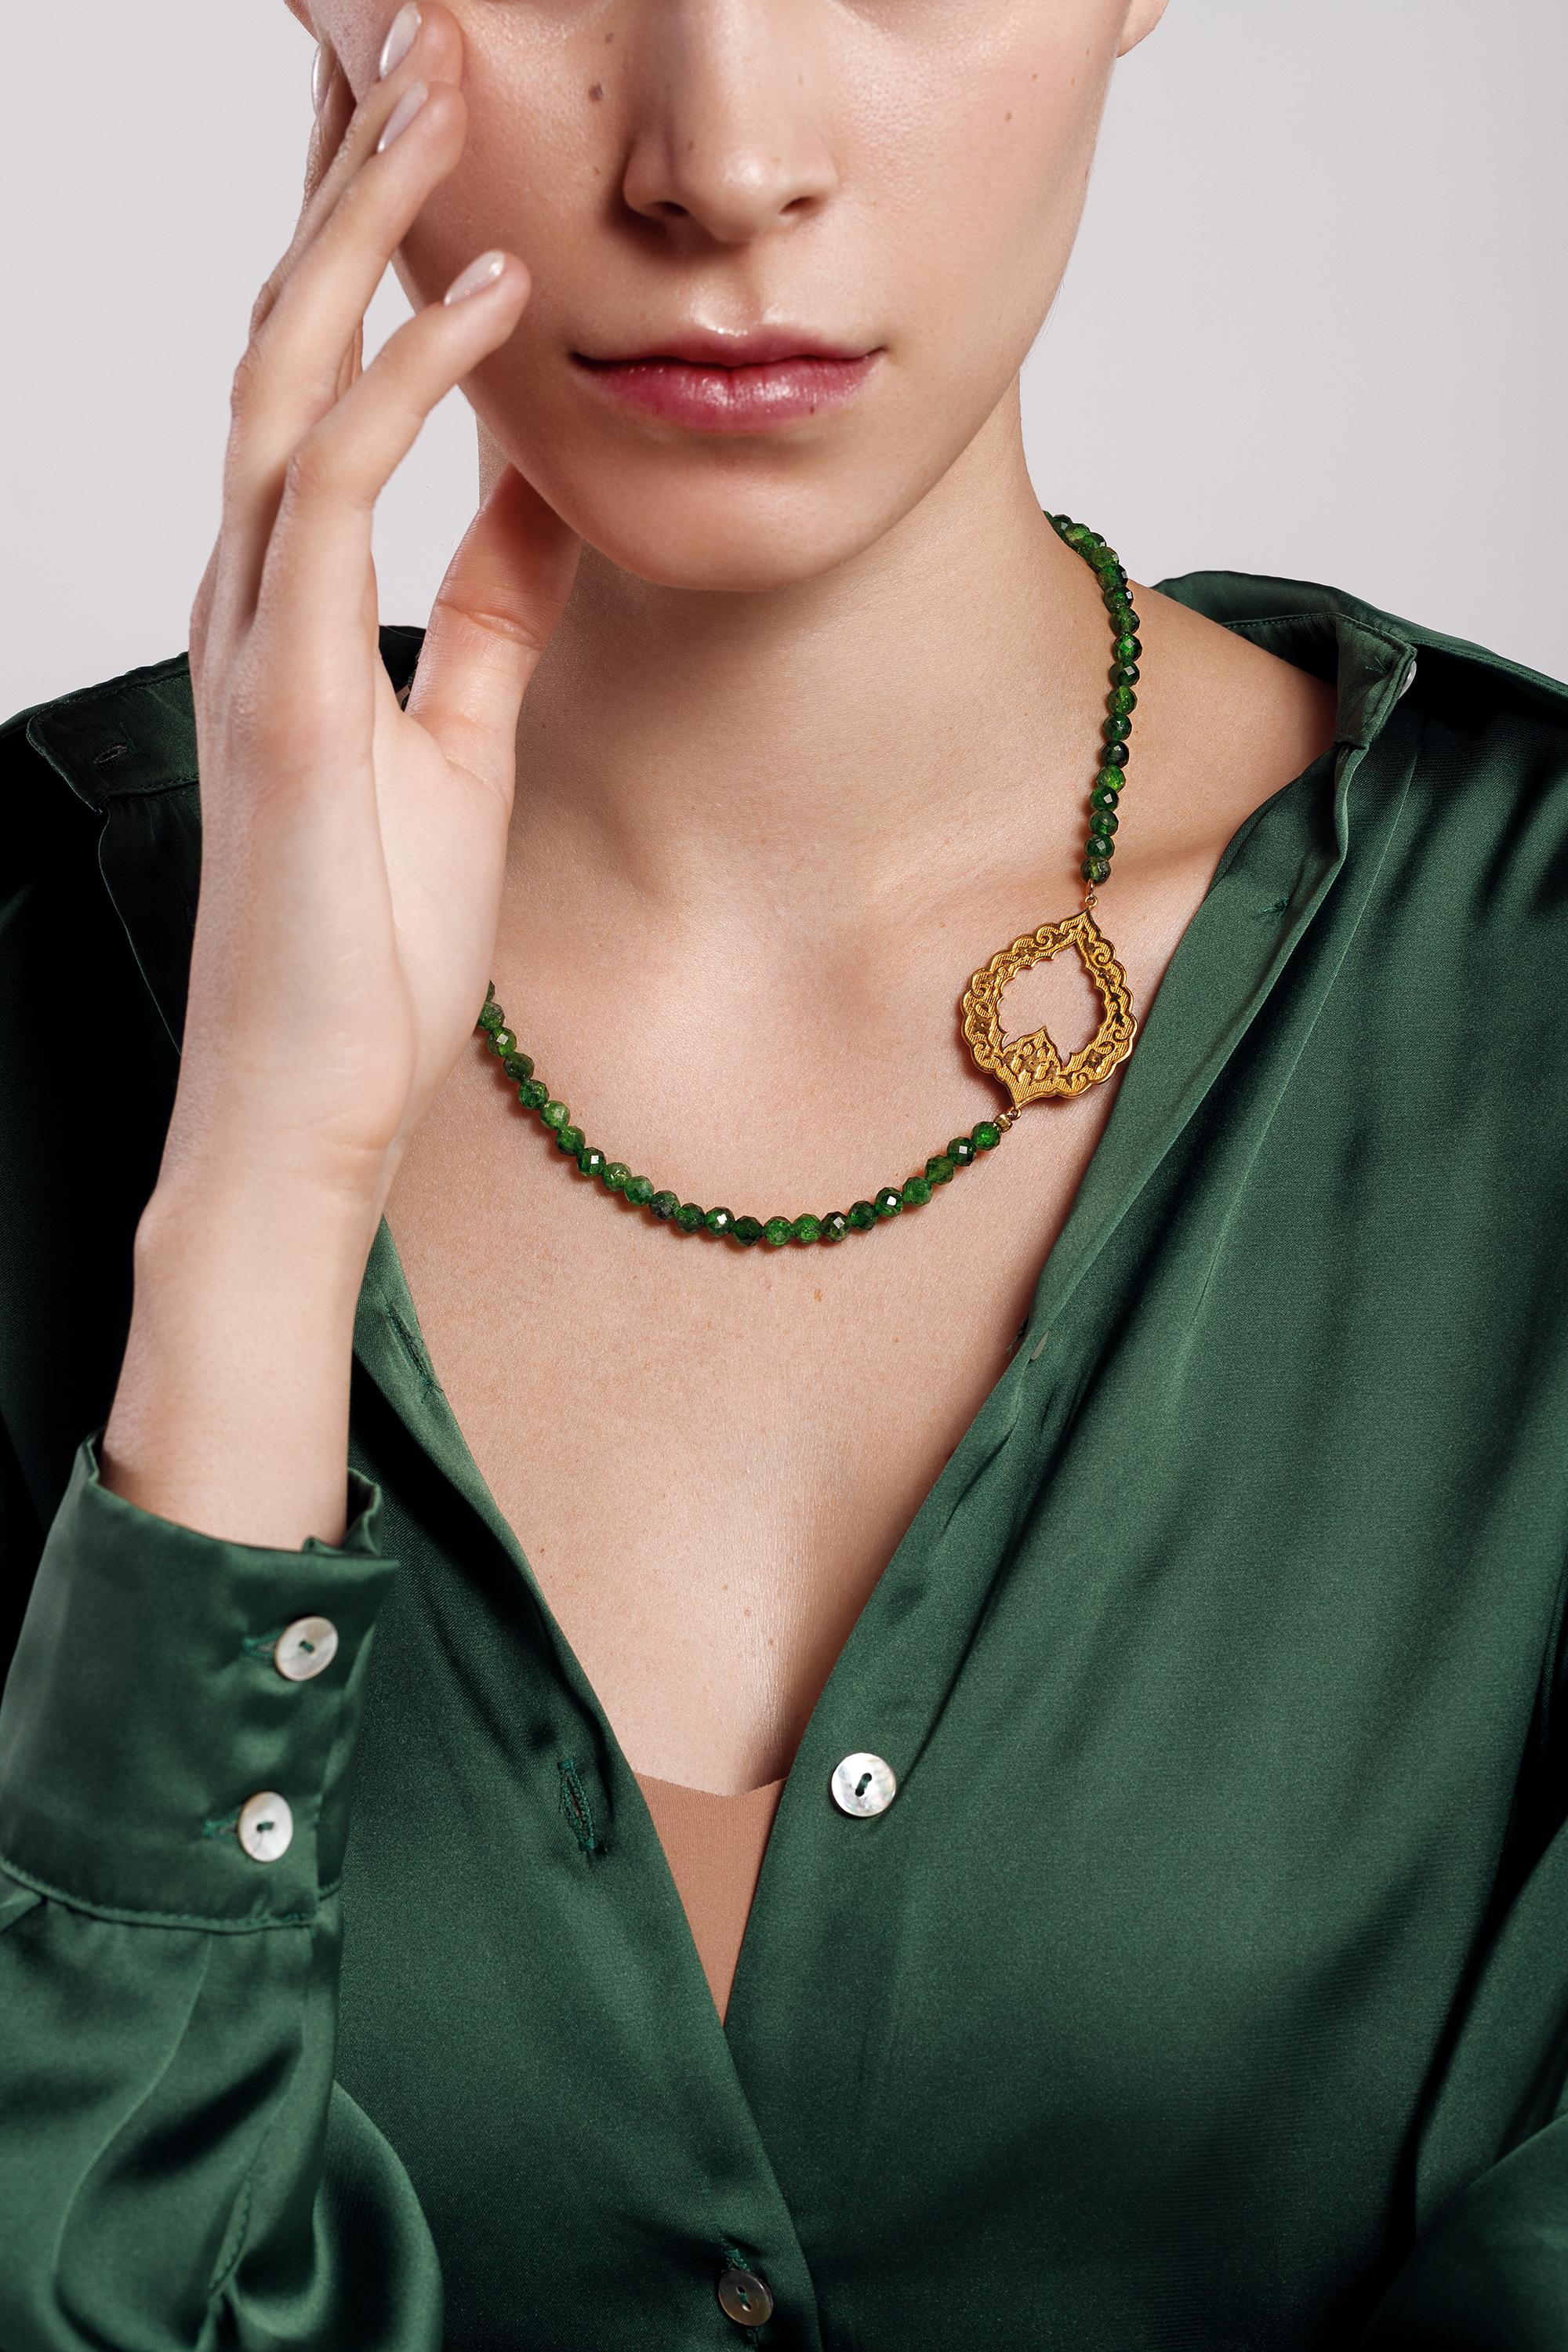 The Eslimi necklace in 18K yellow gold and natural diopside was inspired by patterns and shapes in Persian architecture. This statement necklace with its bold, timeless, contemporary and elegant design, pays homage to Sanaz Doost's motherland Iran,